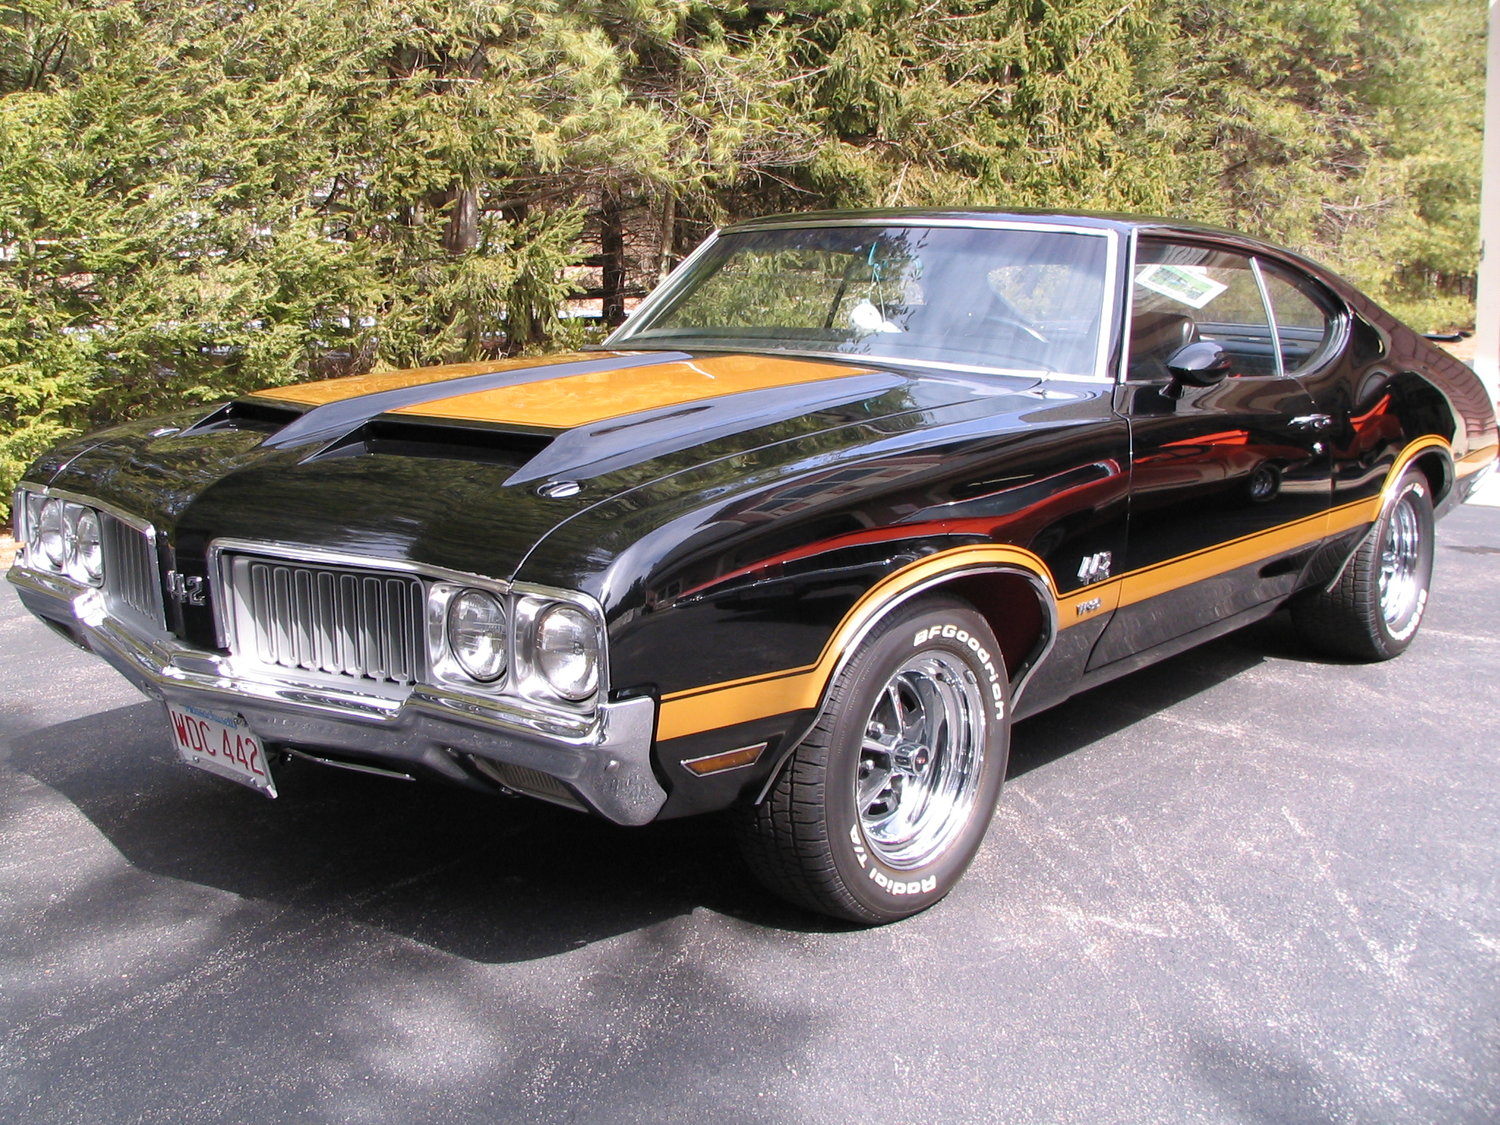 Sold To Ny 1970 Olds 442 Mondello Built 650hp Auto S Matching Drive Train Included Vintage Cars Online Llc